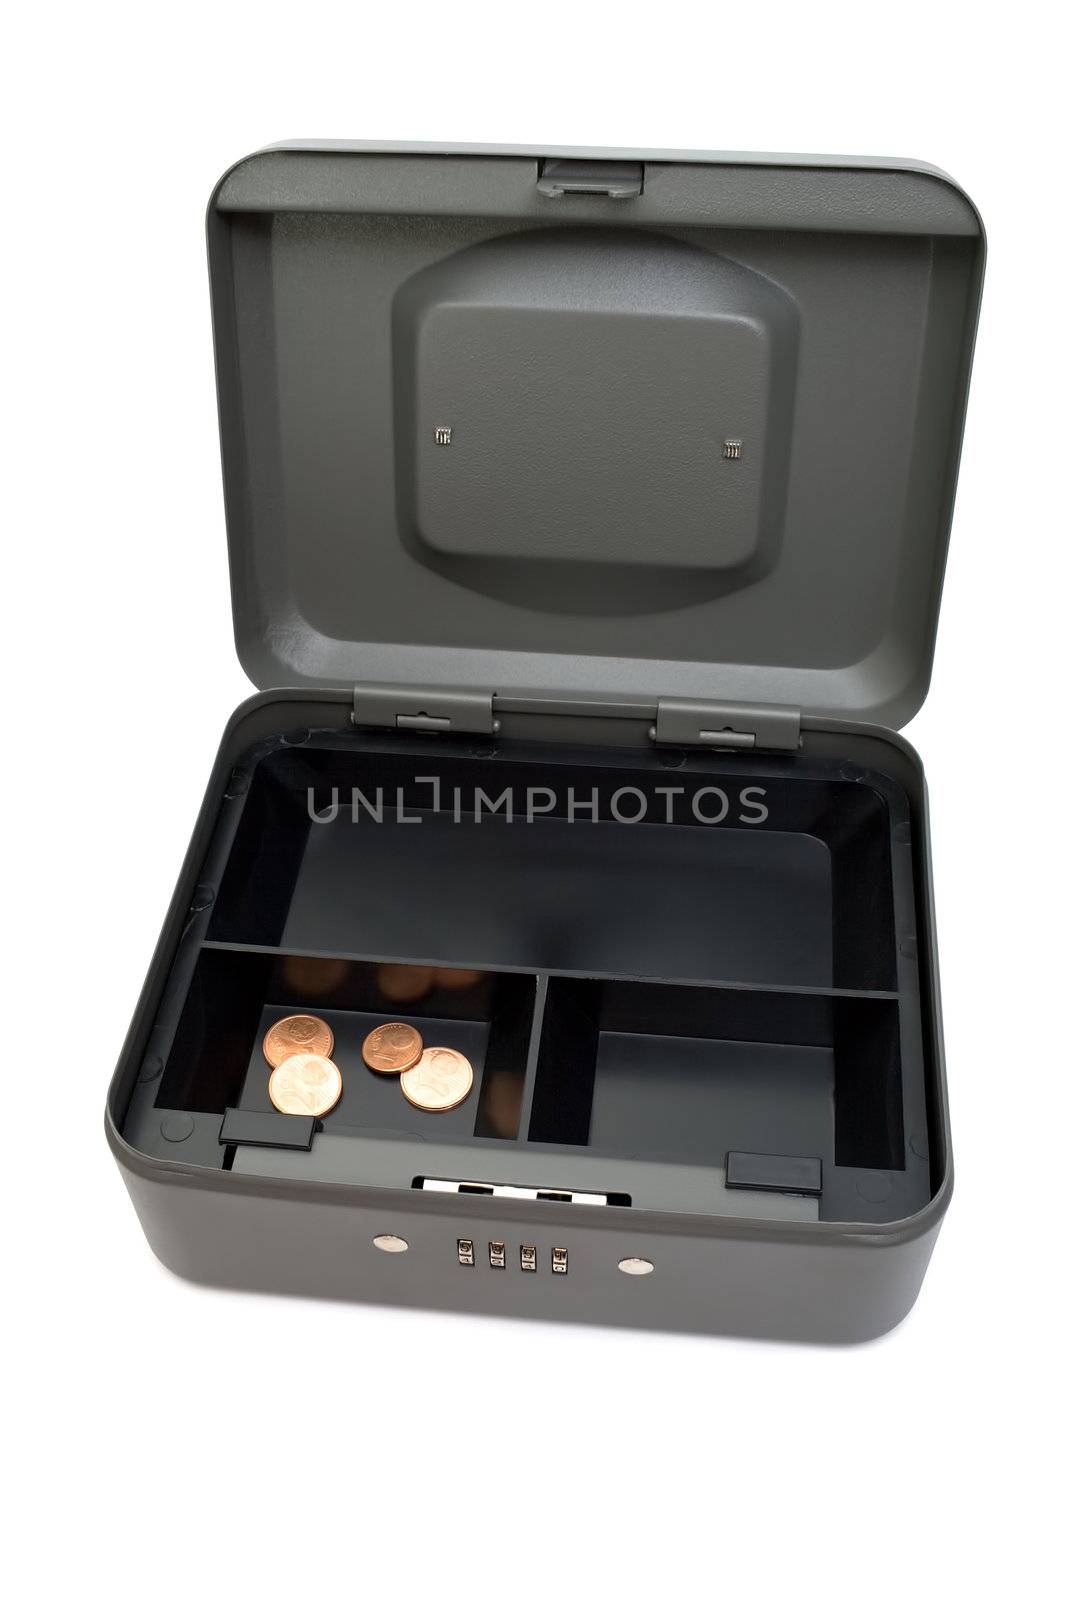 Almost empty cashbox. Last cents in the open cashbox. Isolated on white.